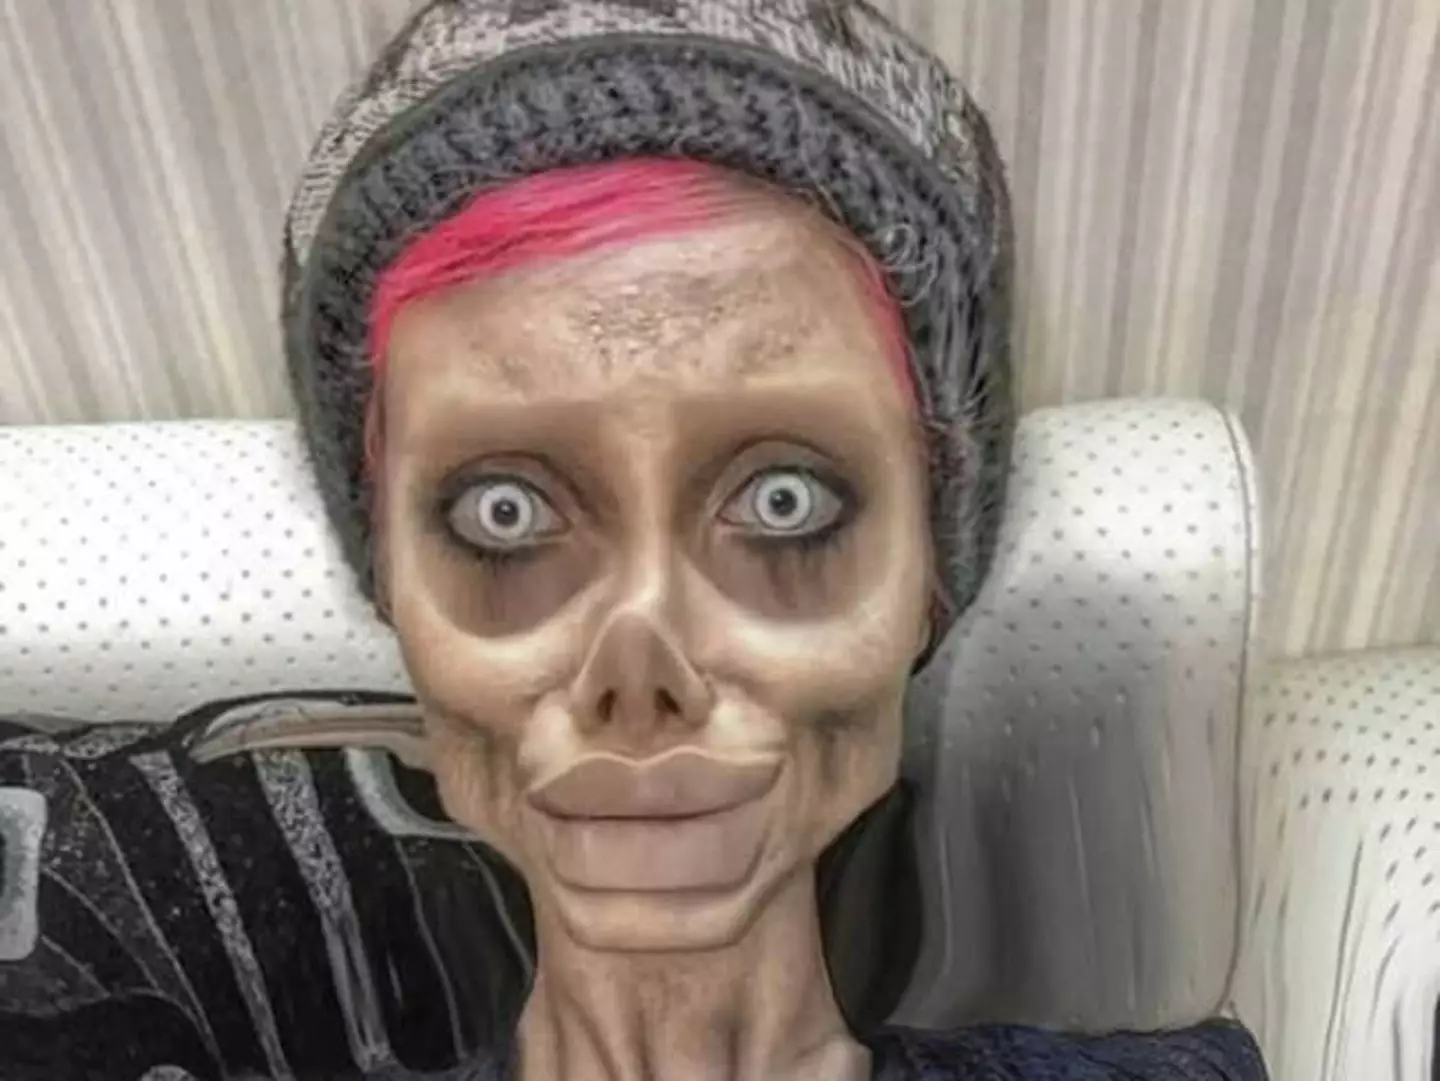 The ‘Zombie’ Angelina Jolie influencer is known for posting to Instagram.